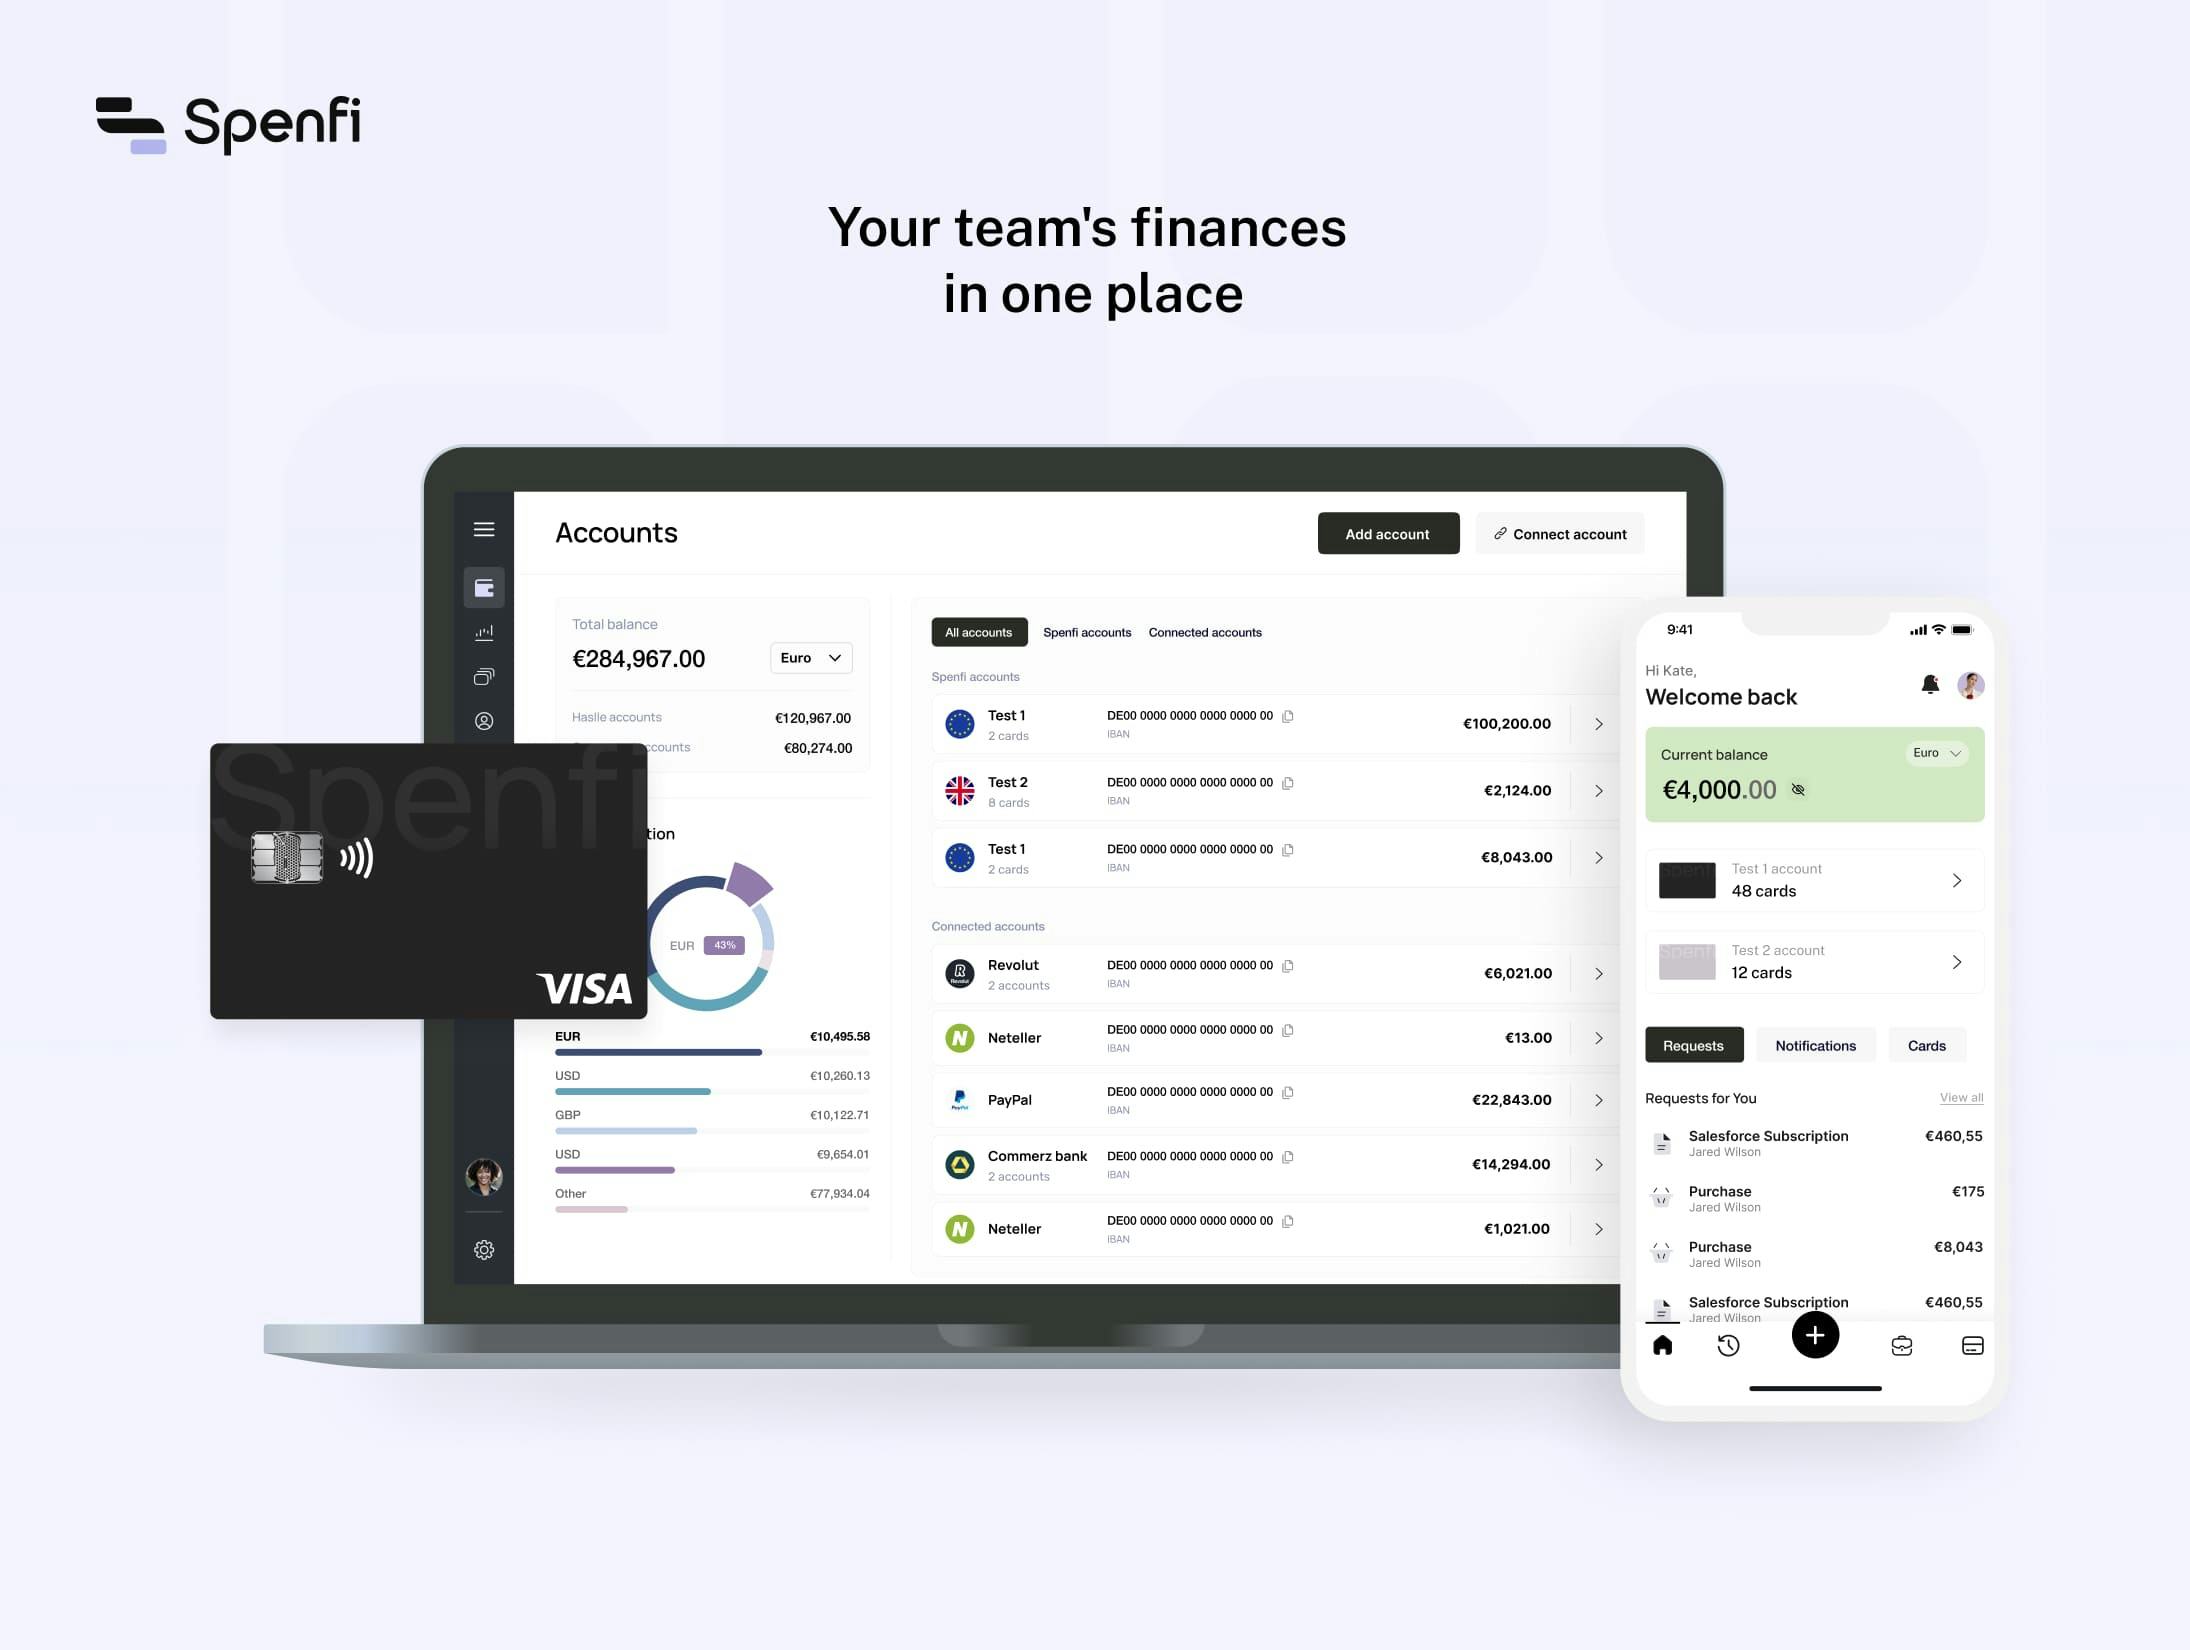 Spenfi Software - Spenfi product display, showing payment card, mobile application and spending dashboard